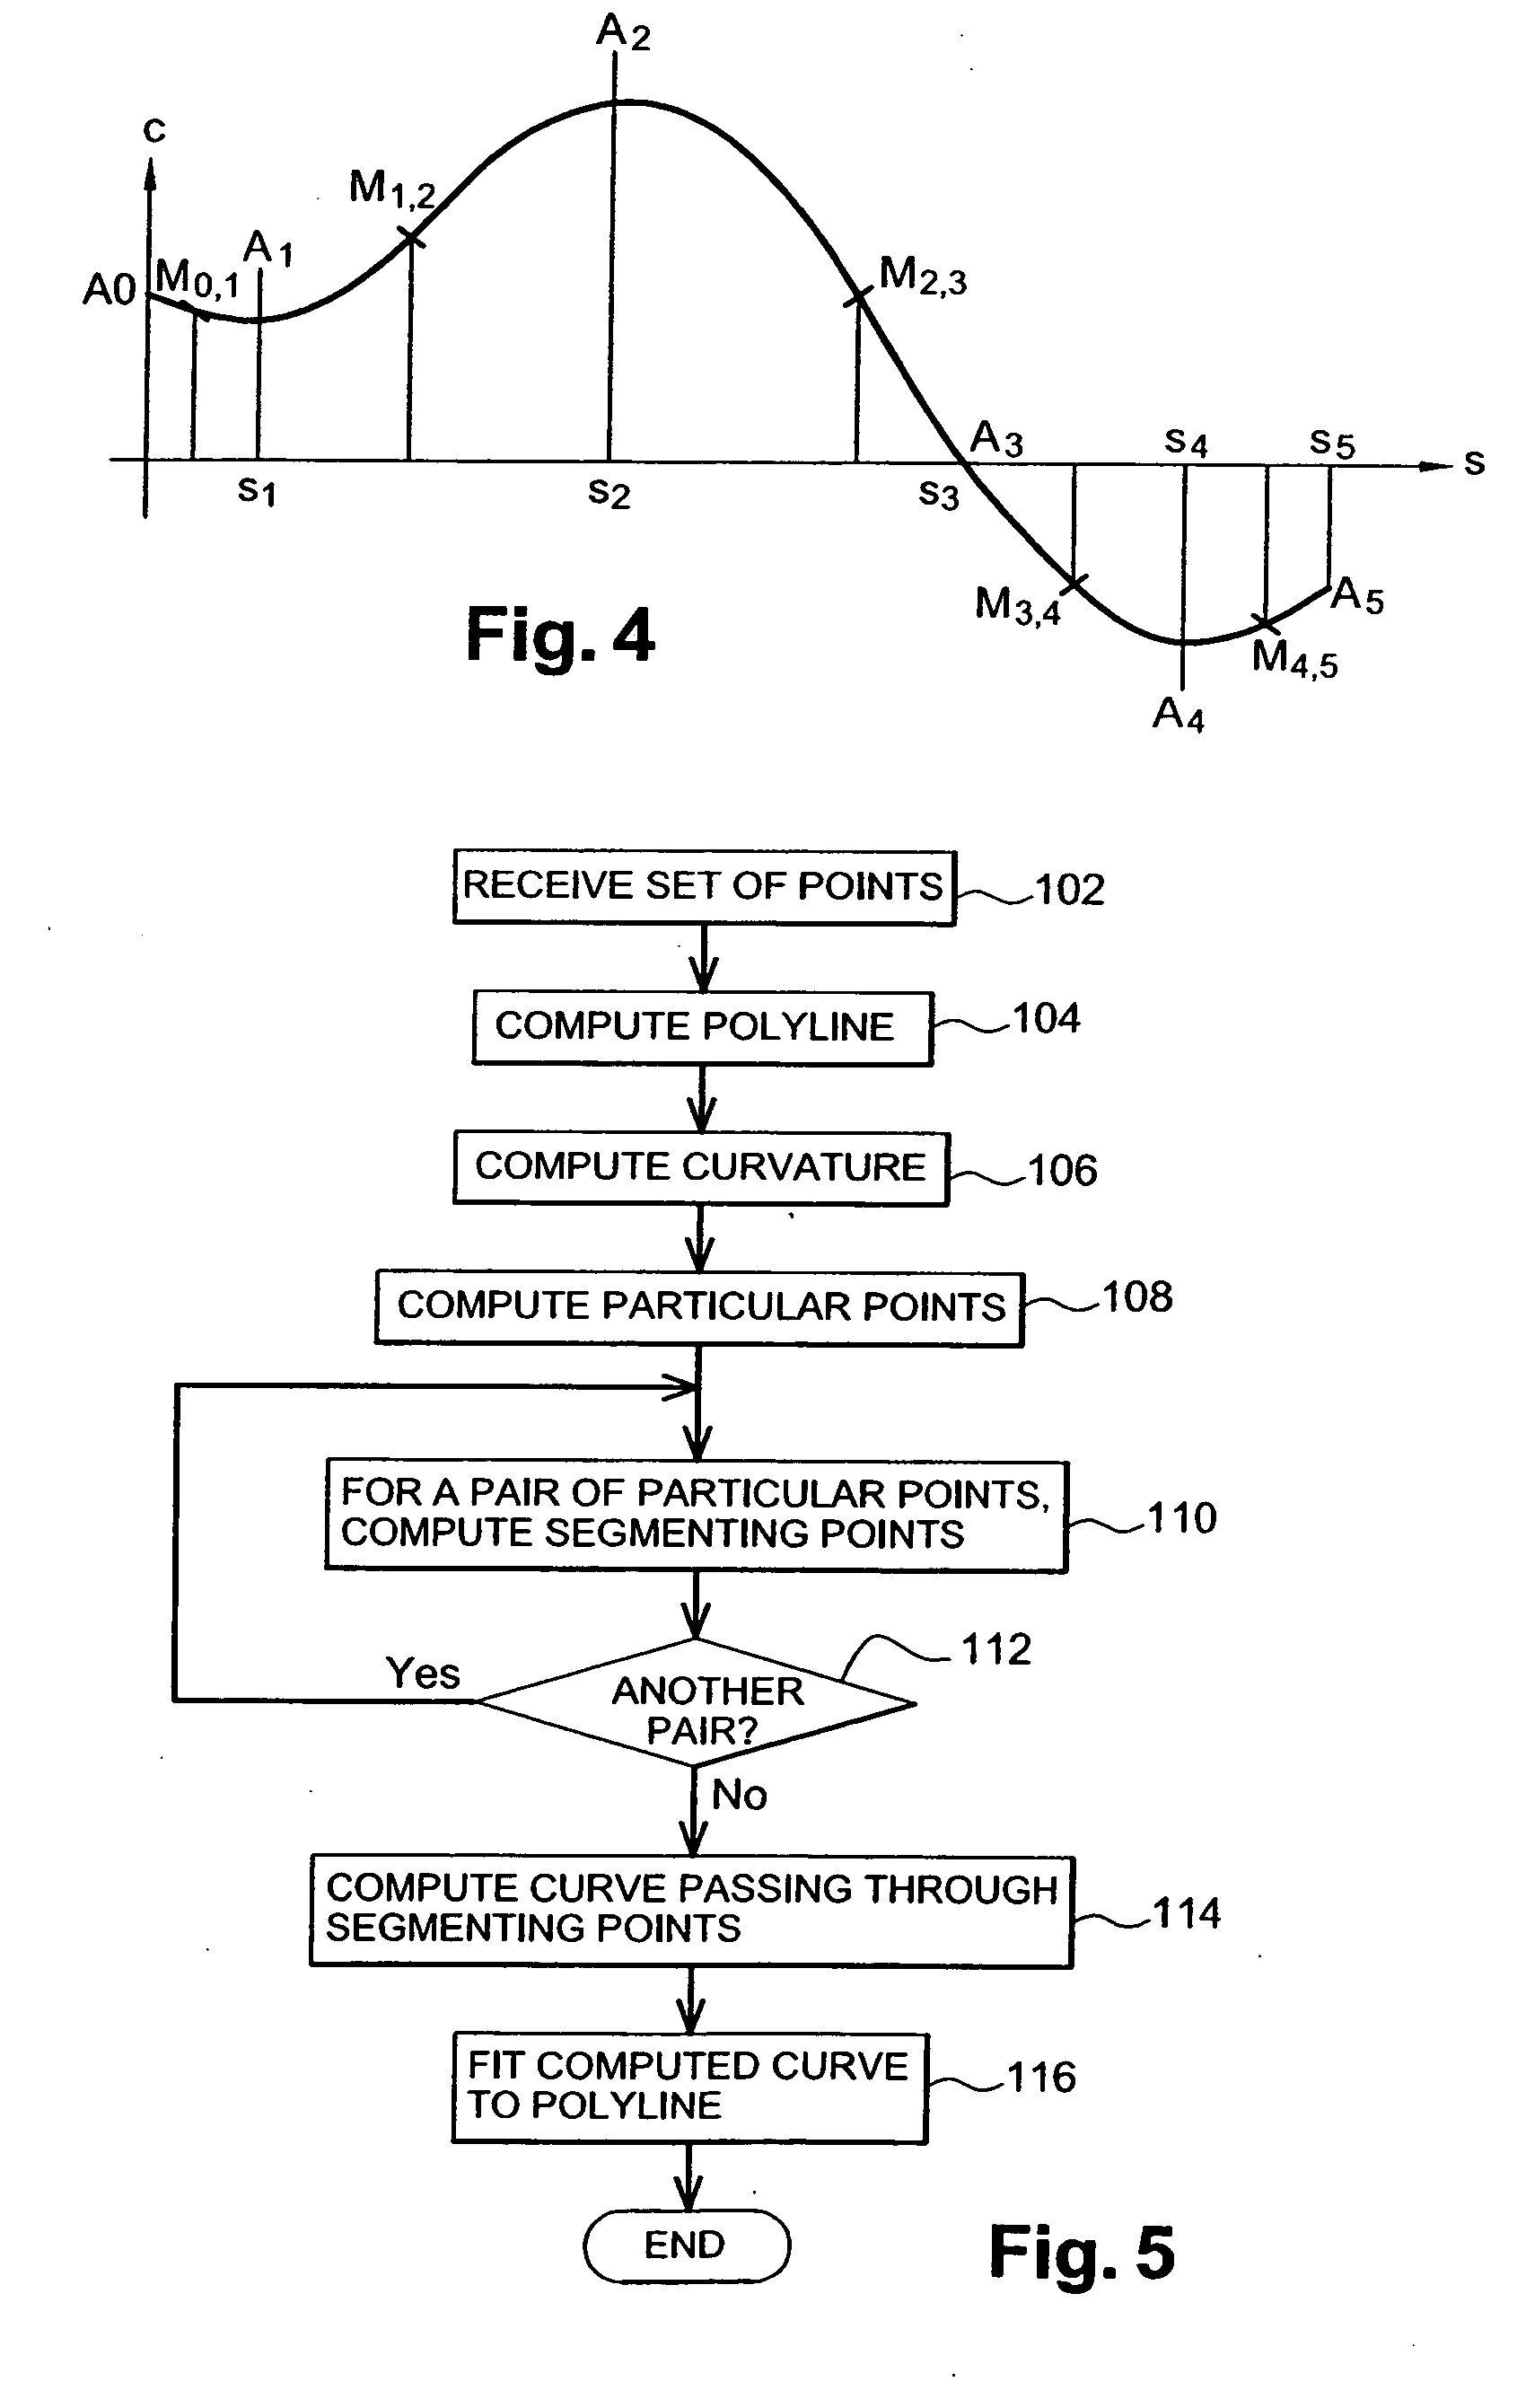 Process for drafting a curve in a computer-aided design system